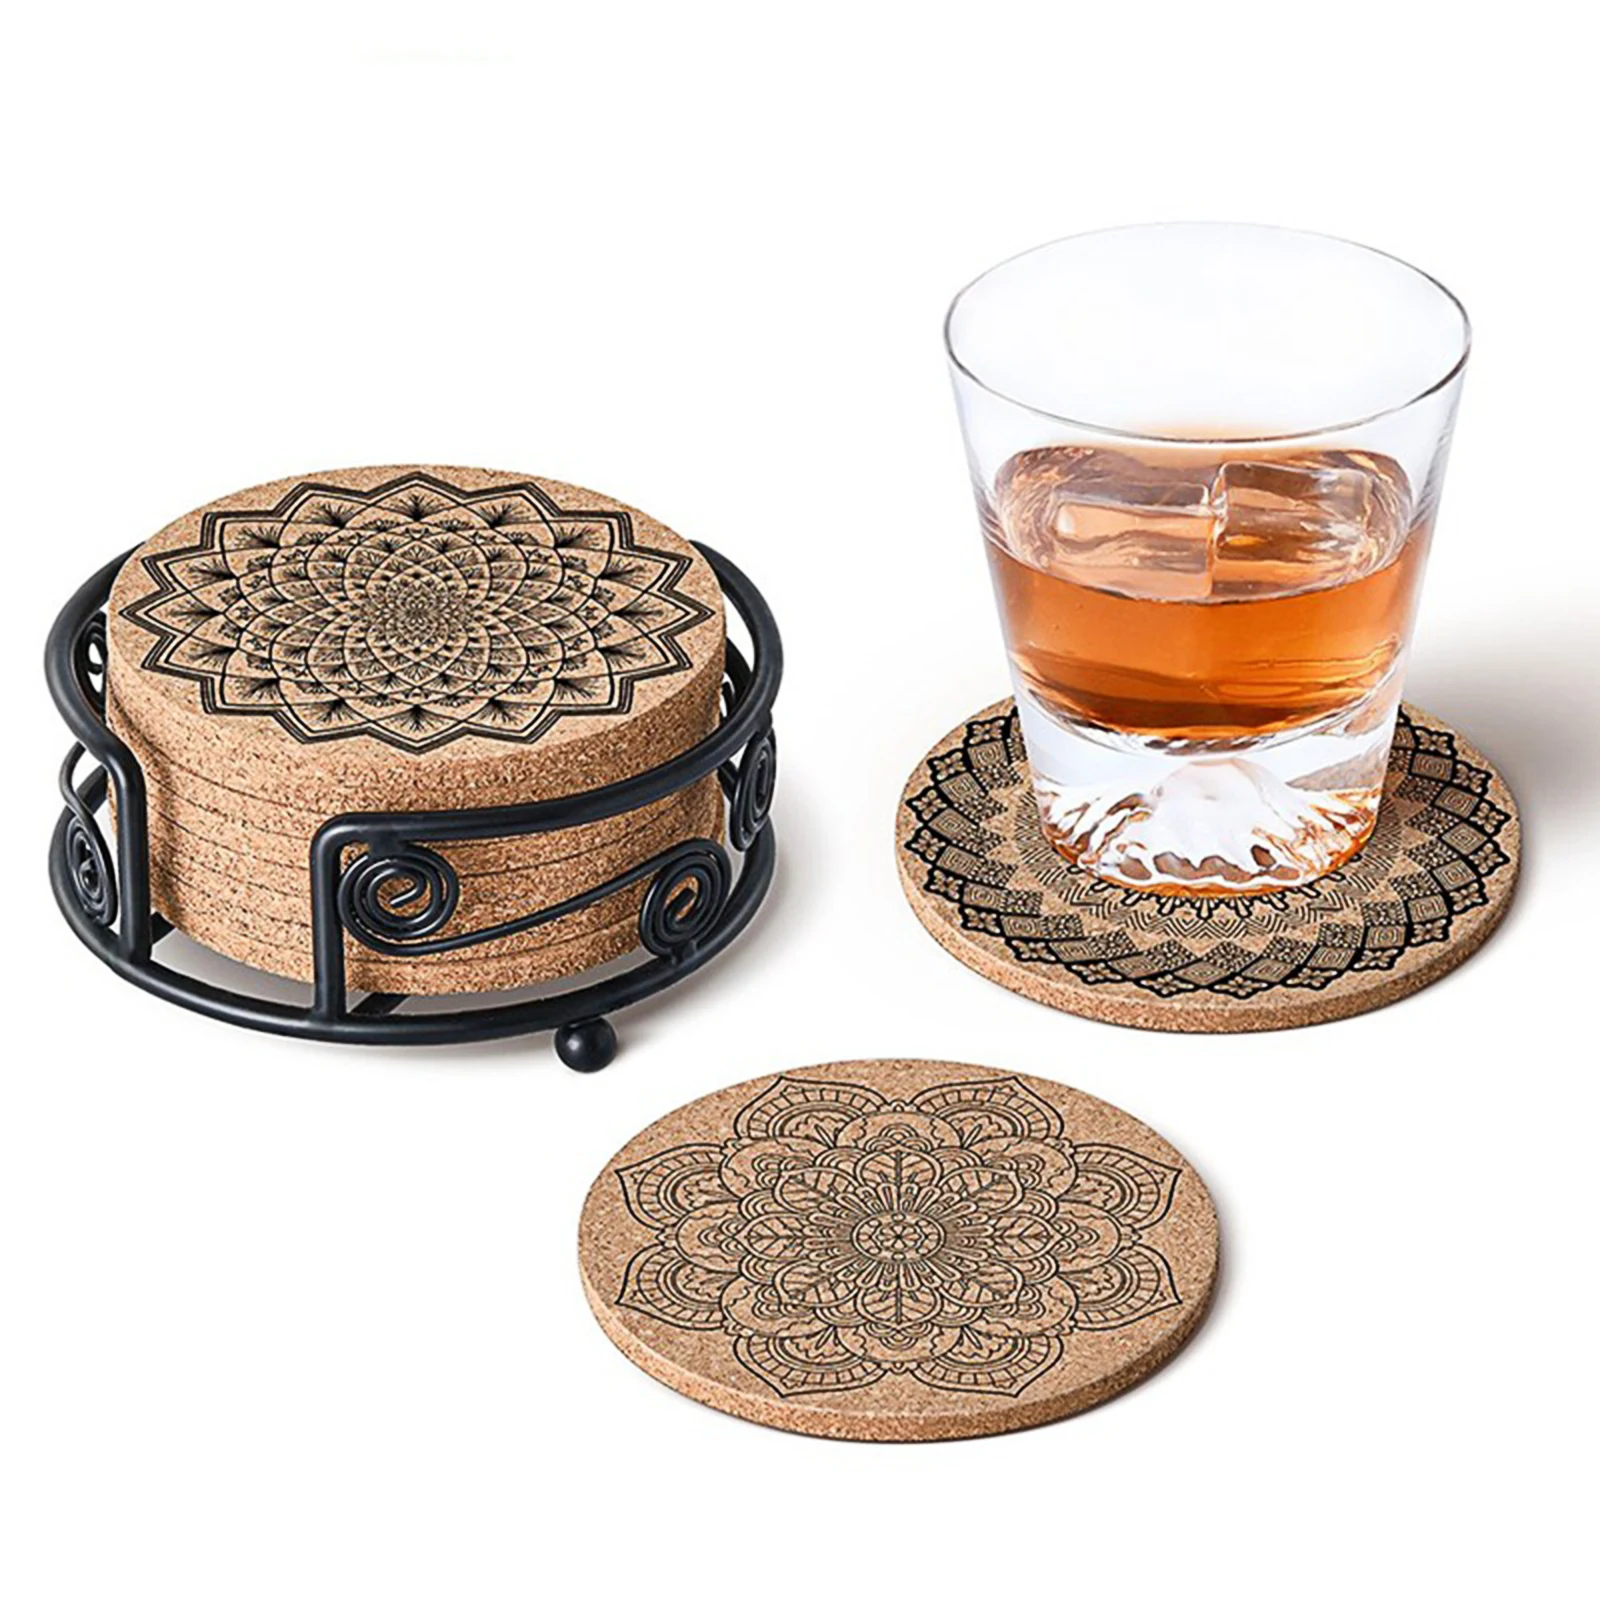 

8PCS 3D Mandala Floral Pattern Drink Coasters Home Fashion Heat-Insulated Dinning Table Mats Coffee Cup Pads Rugs